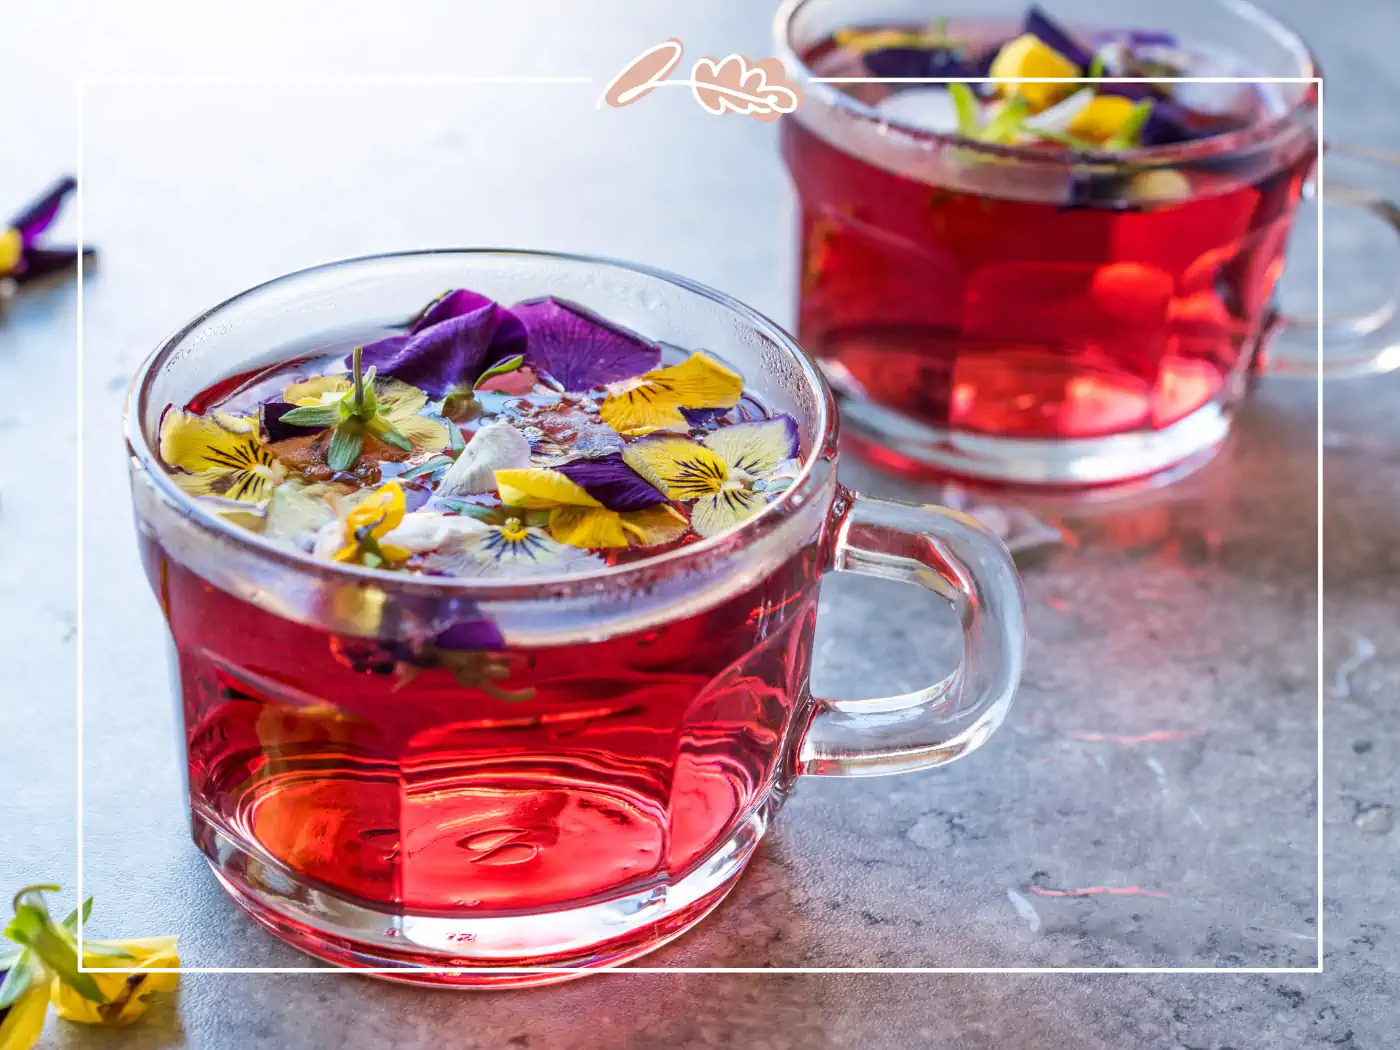 Glass cup filled with a red beverage and floating edible flowers. Fabulous Flowers and Gifts.